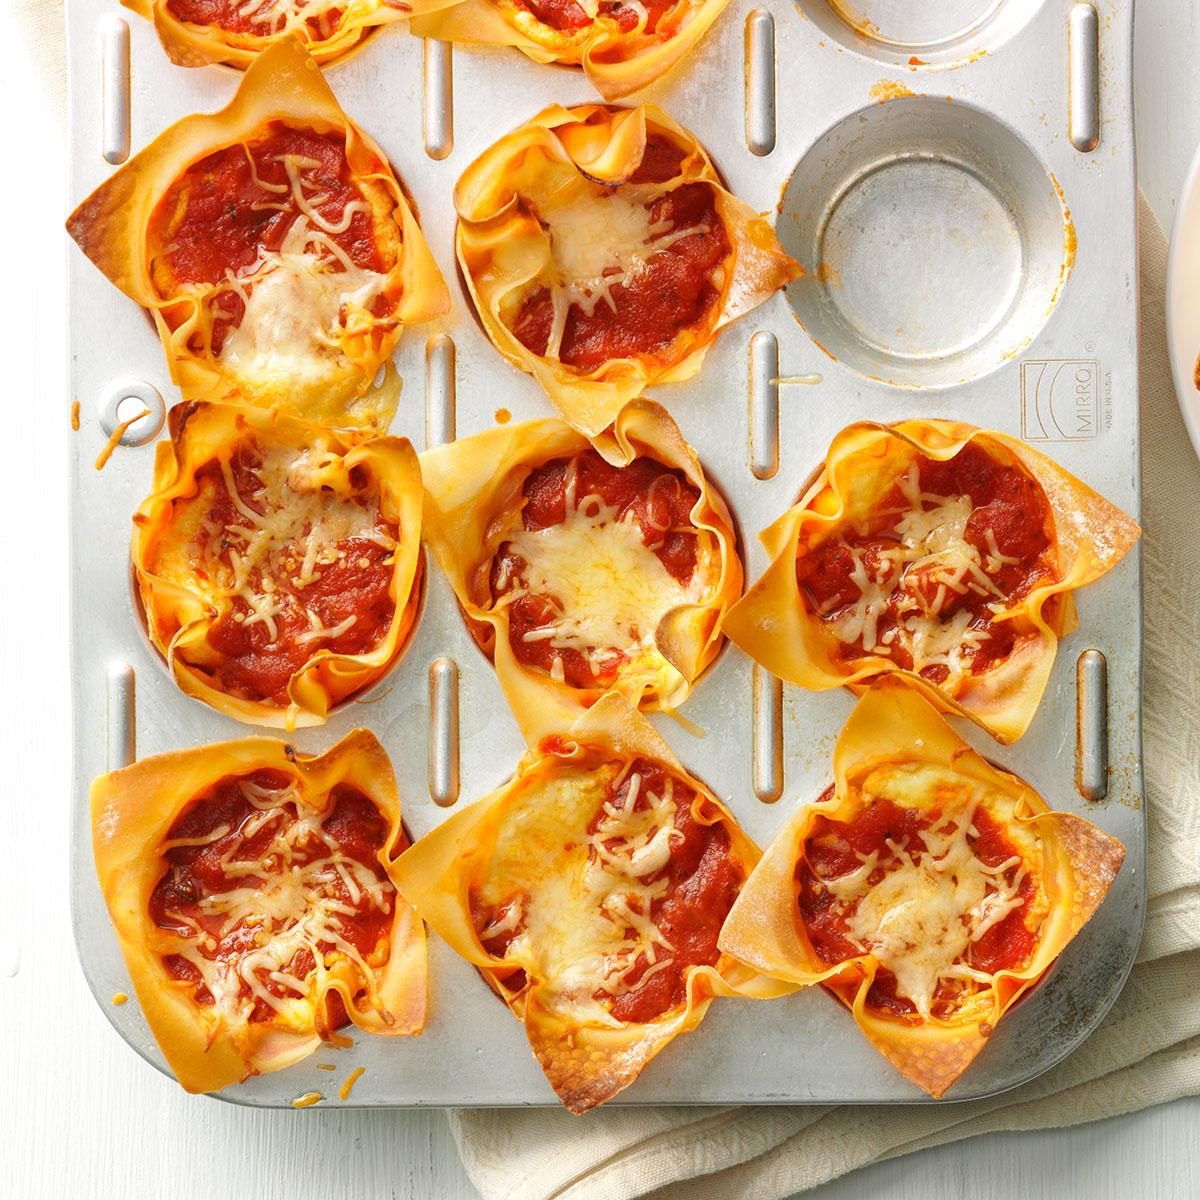 <p>This is a super fun way to serve lasagna for make-ahead lunches, potlucks or other fun get-togethers. My daughter took some of these to work and by noon was emailing me for the recipe. —Sally Kilkenny, Granger, Iowa </p> <div class="listicle-page__buttons"> <div class="listicle-page__cta-button"><a href='https://www.tasteofhome.com/recipes/muffin-tin-lasagnas/'>Go to Recipe</a></div> </div>